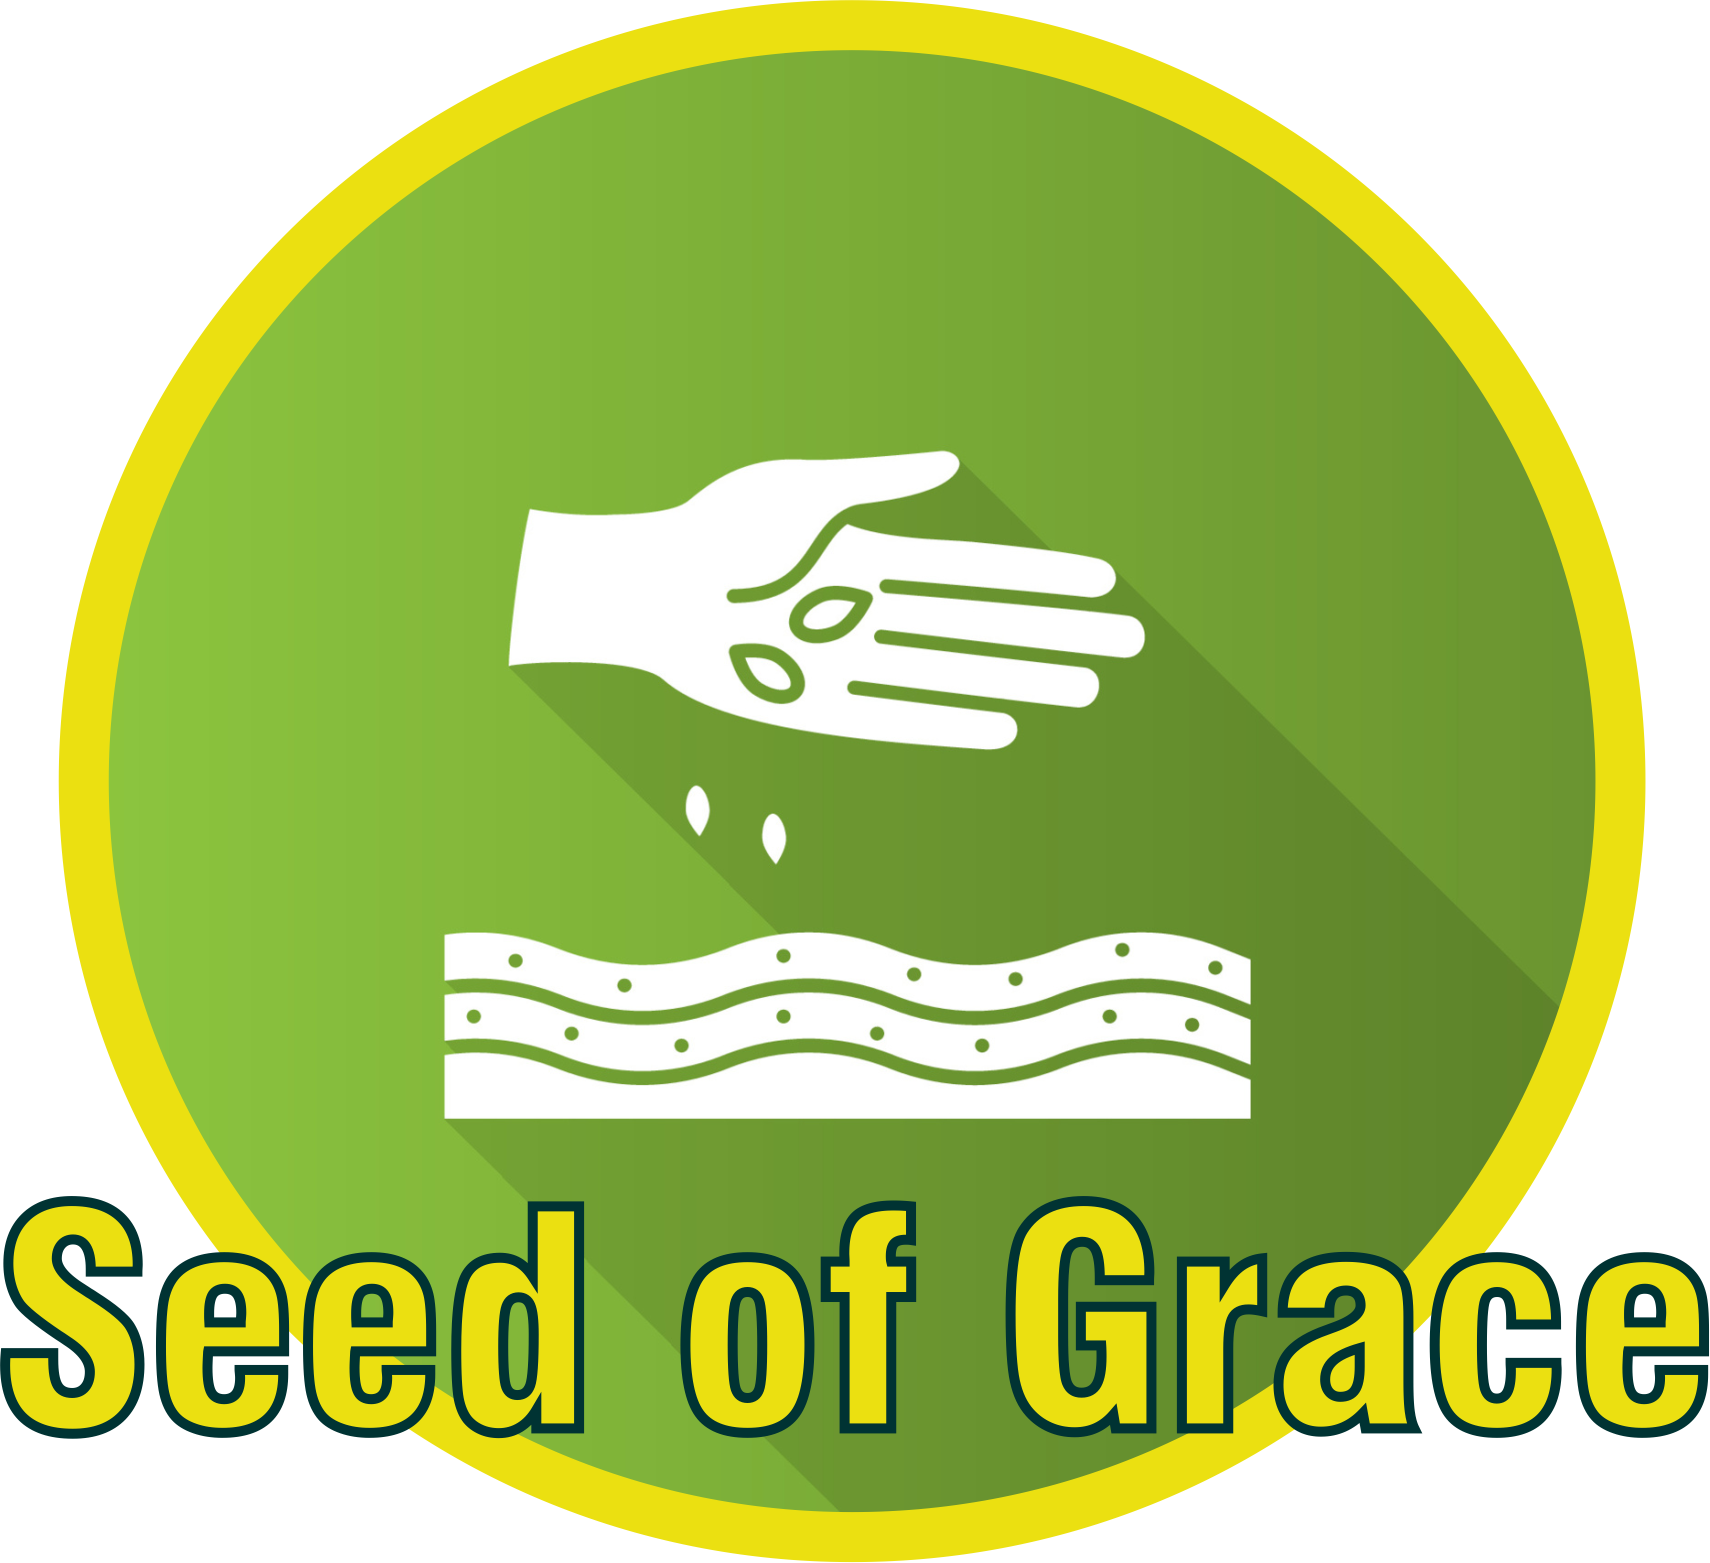 Seed of Grace